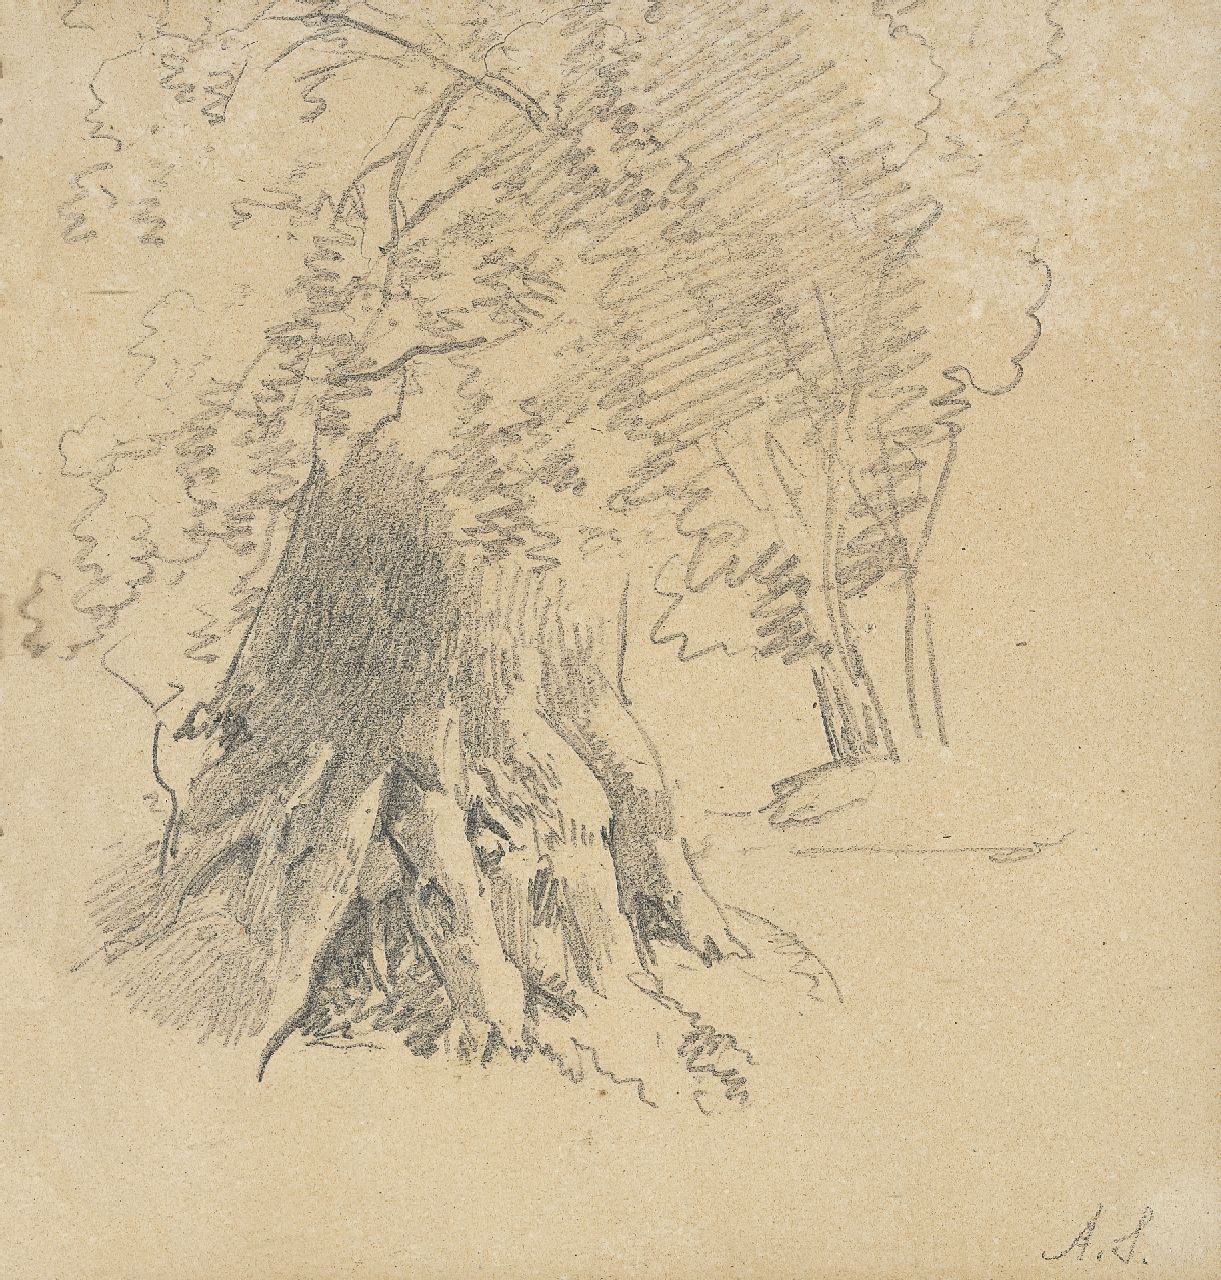 Schelfhout A.  | Andreas Schelfhout, A study of a tree, Bleistift auf Papier 17,9 x 17,4 cm, signed l.r. with initials